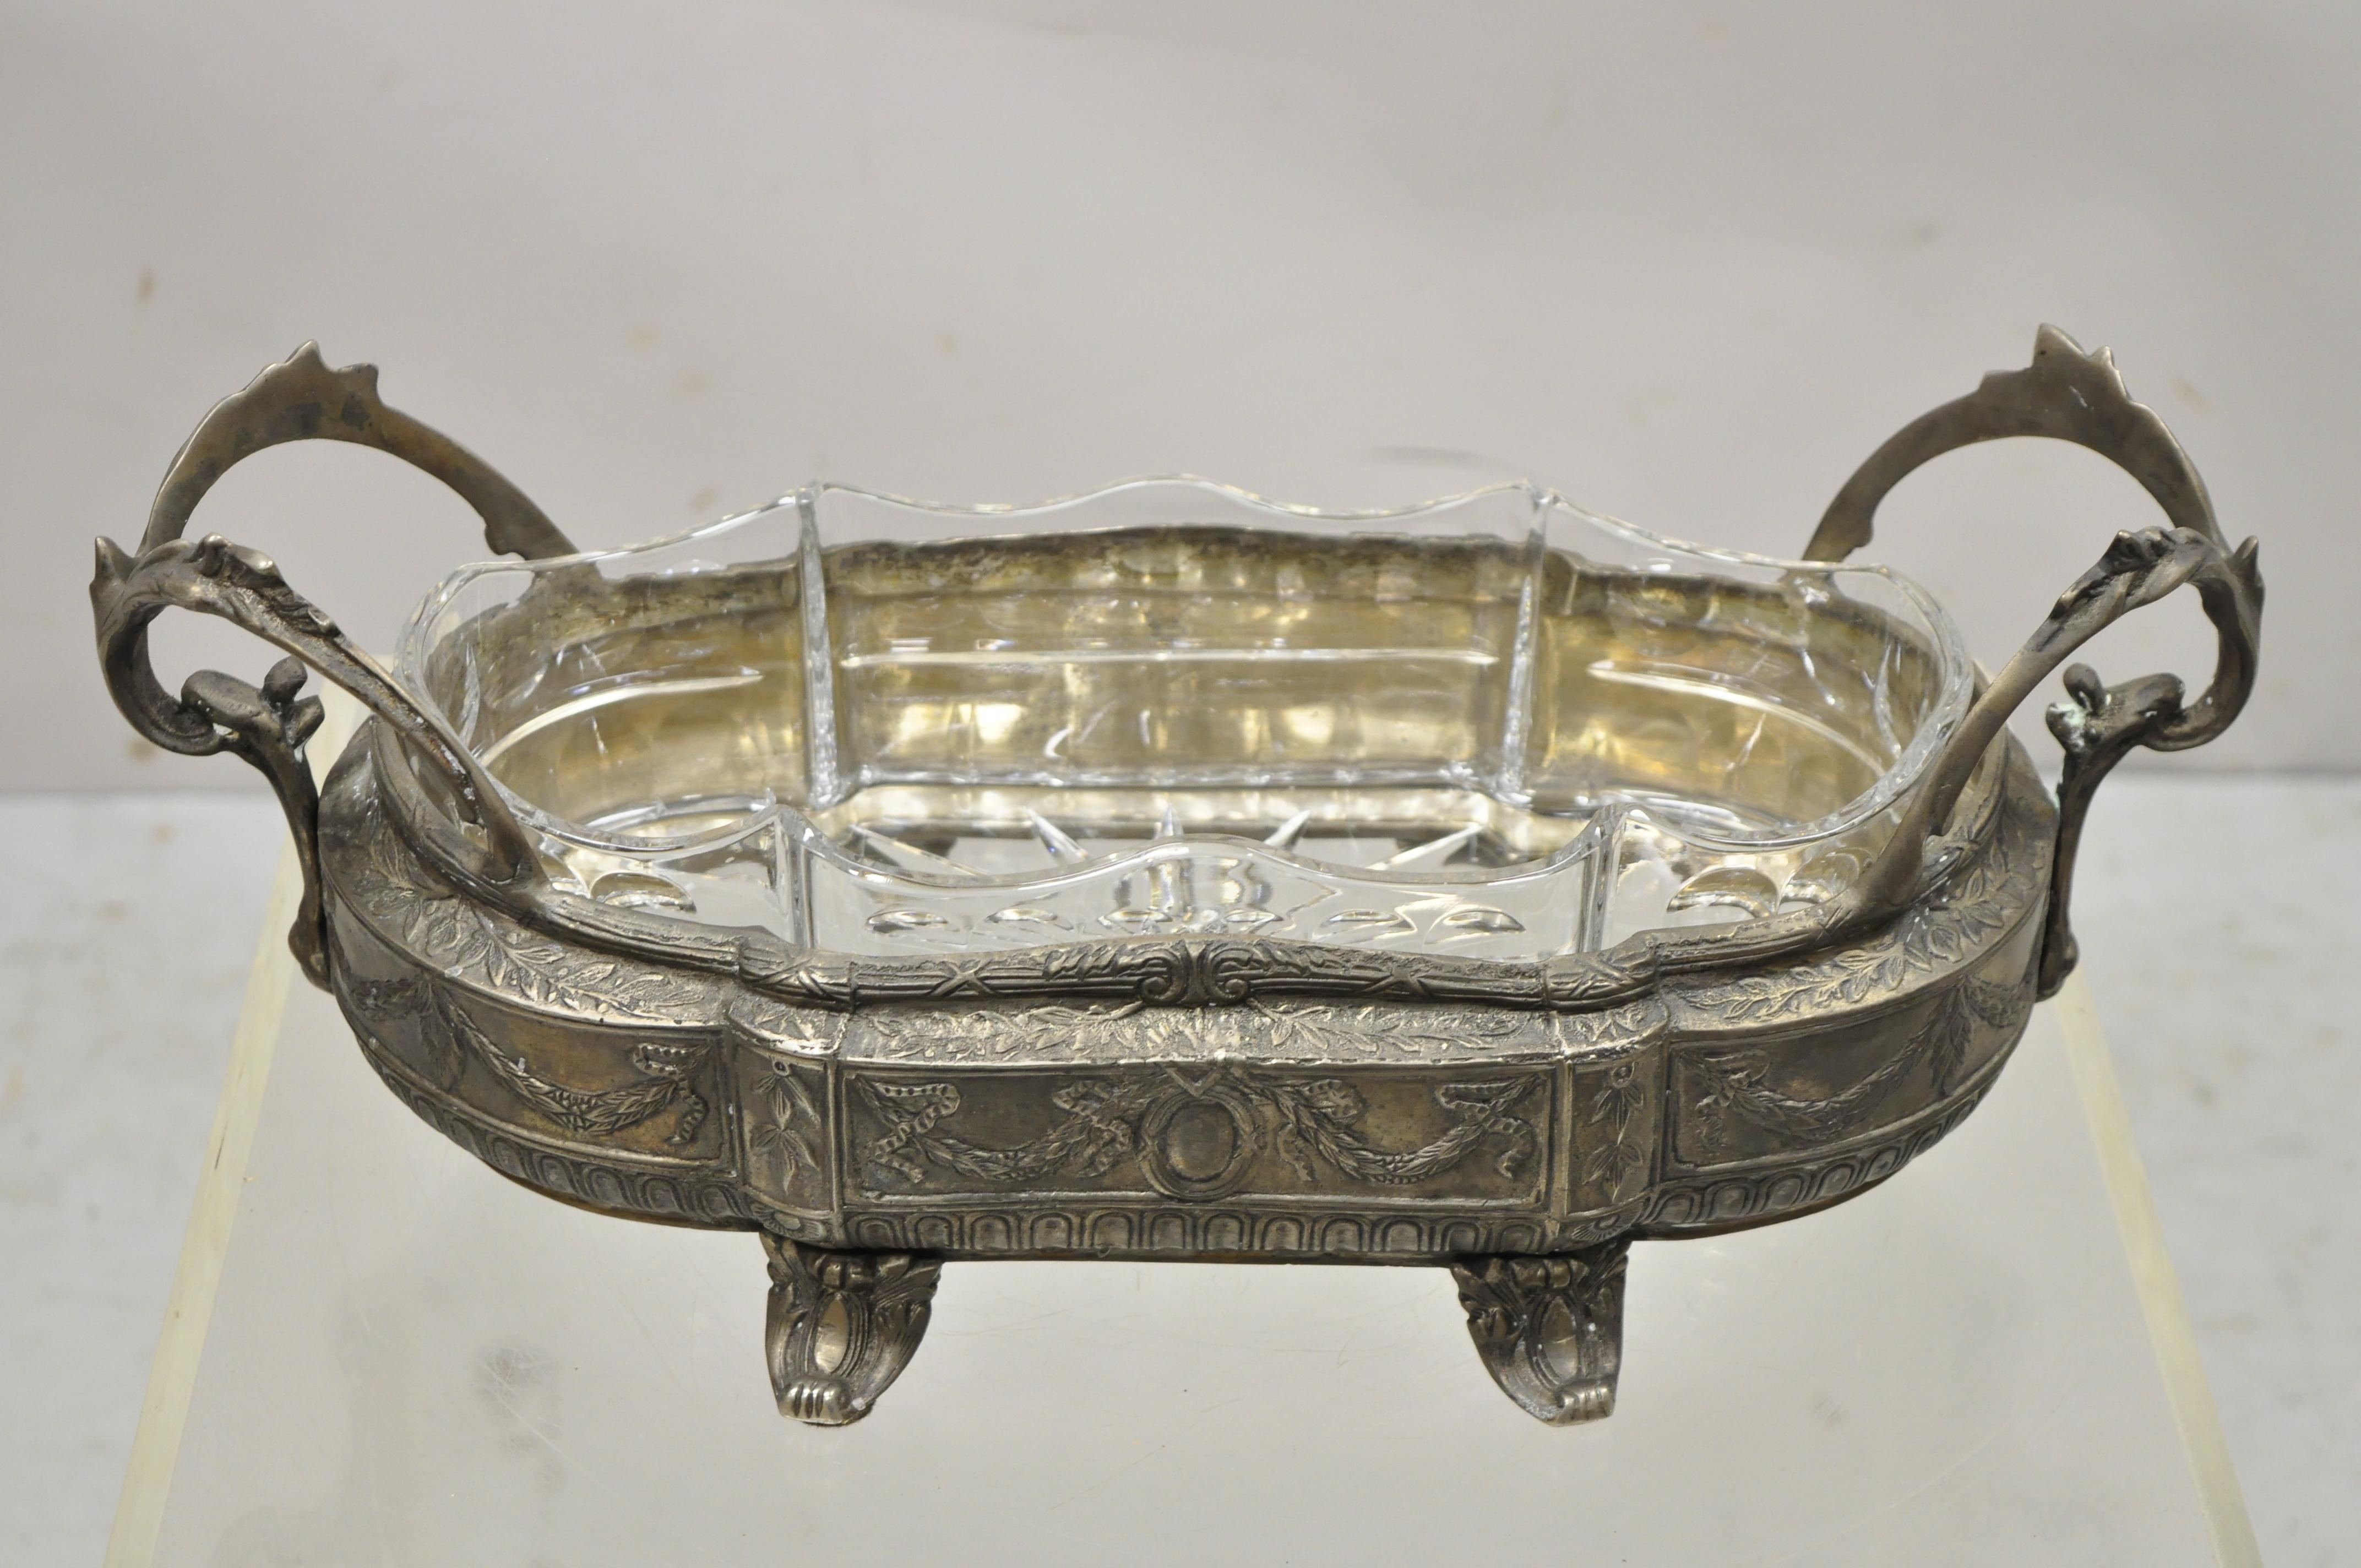 Nickel Silverplate French Louis XVI Style Centerpiece Bowl Dish Planter with Drape Design. Item features removable crystal glass insert, drape design, ornate twin handles, great style and form. Circa late 20th - early 21st century. Measurements: